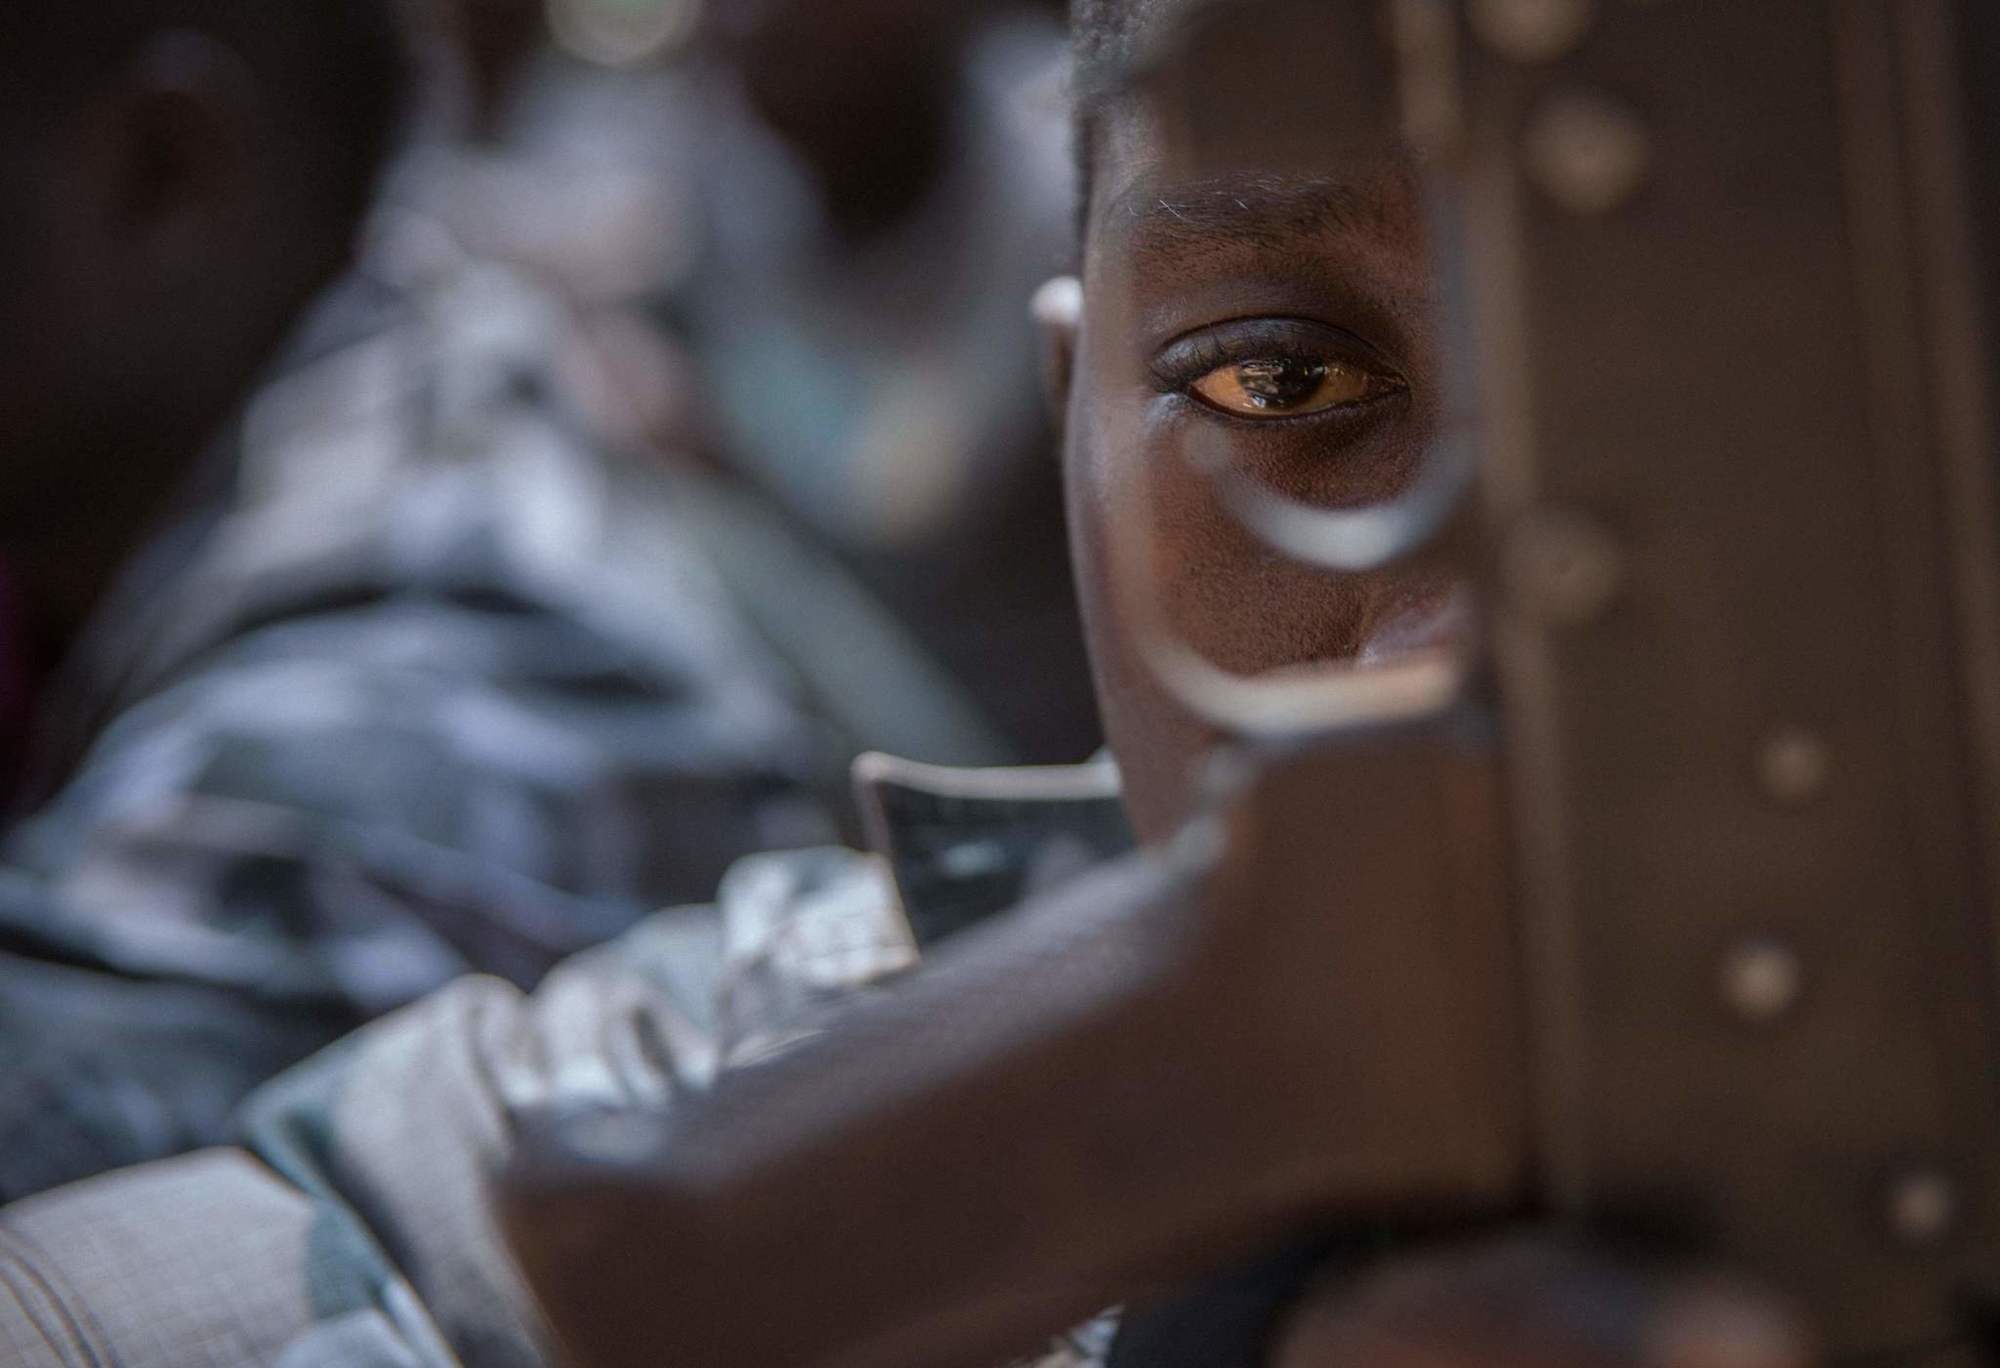 child soldiers released in South Sudan